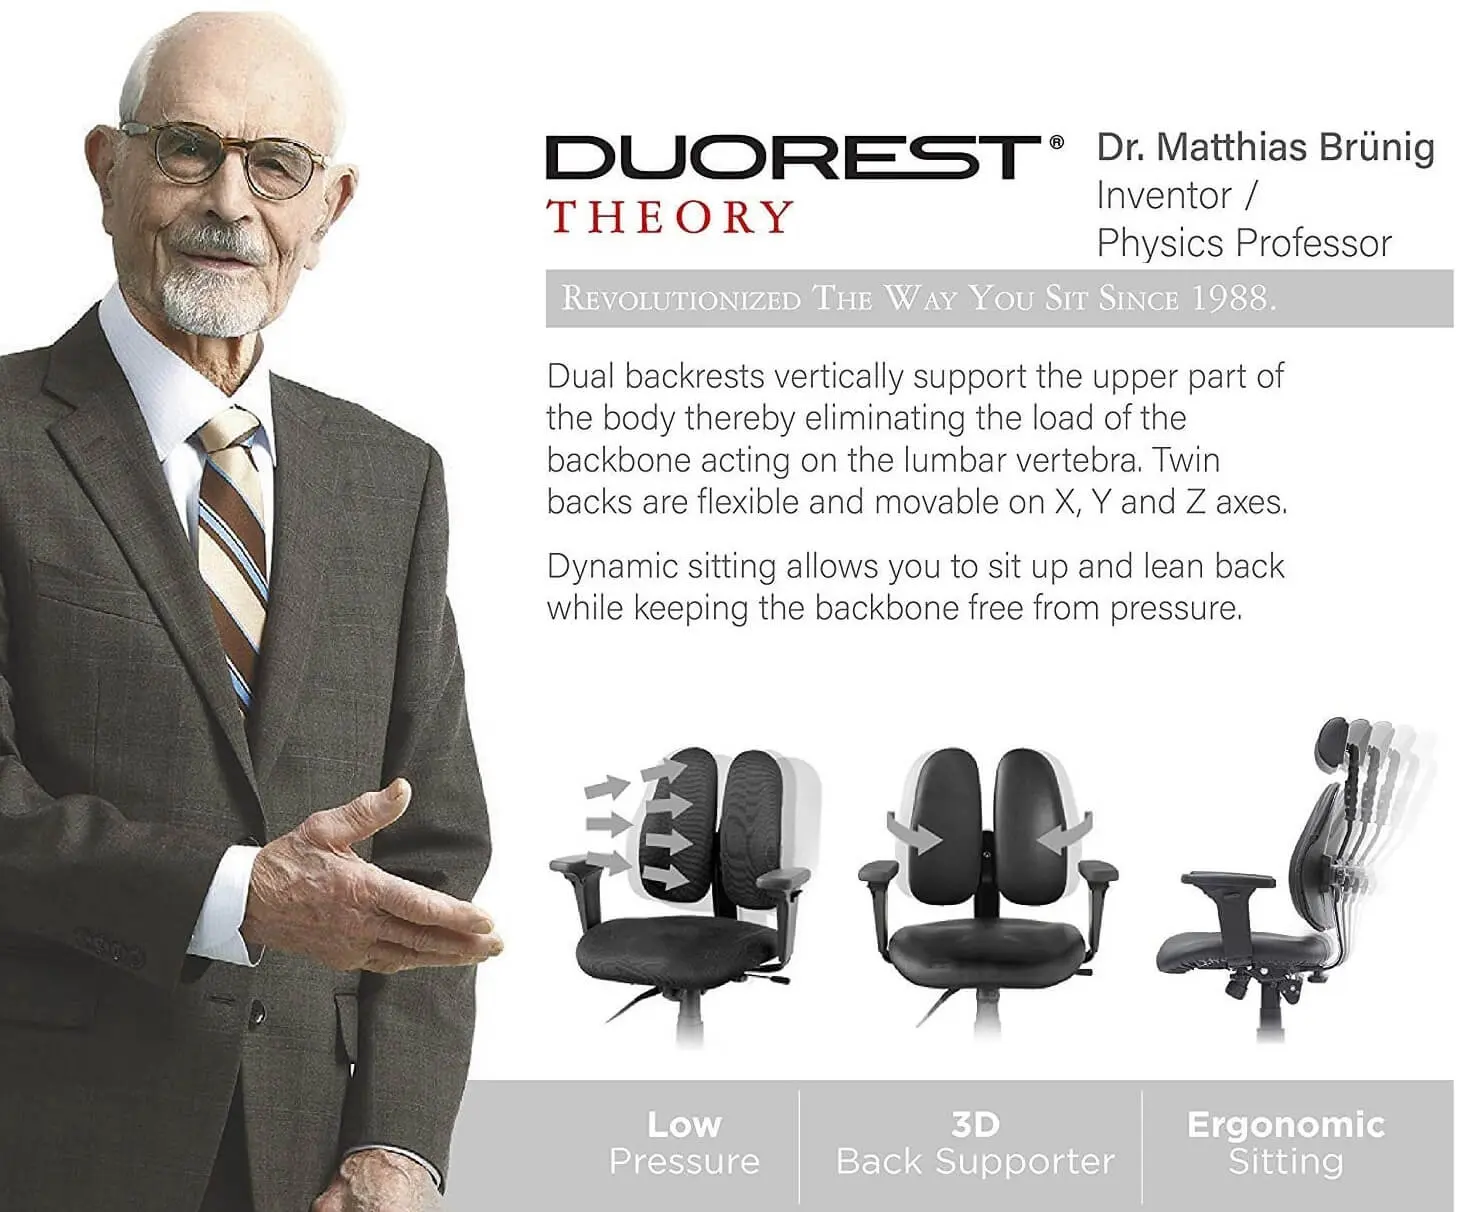 Duorest theory by Dr. Matthias